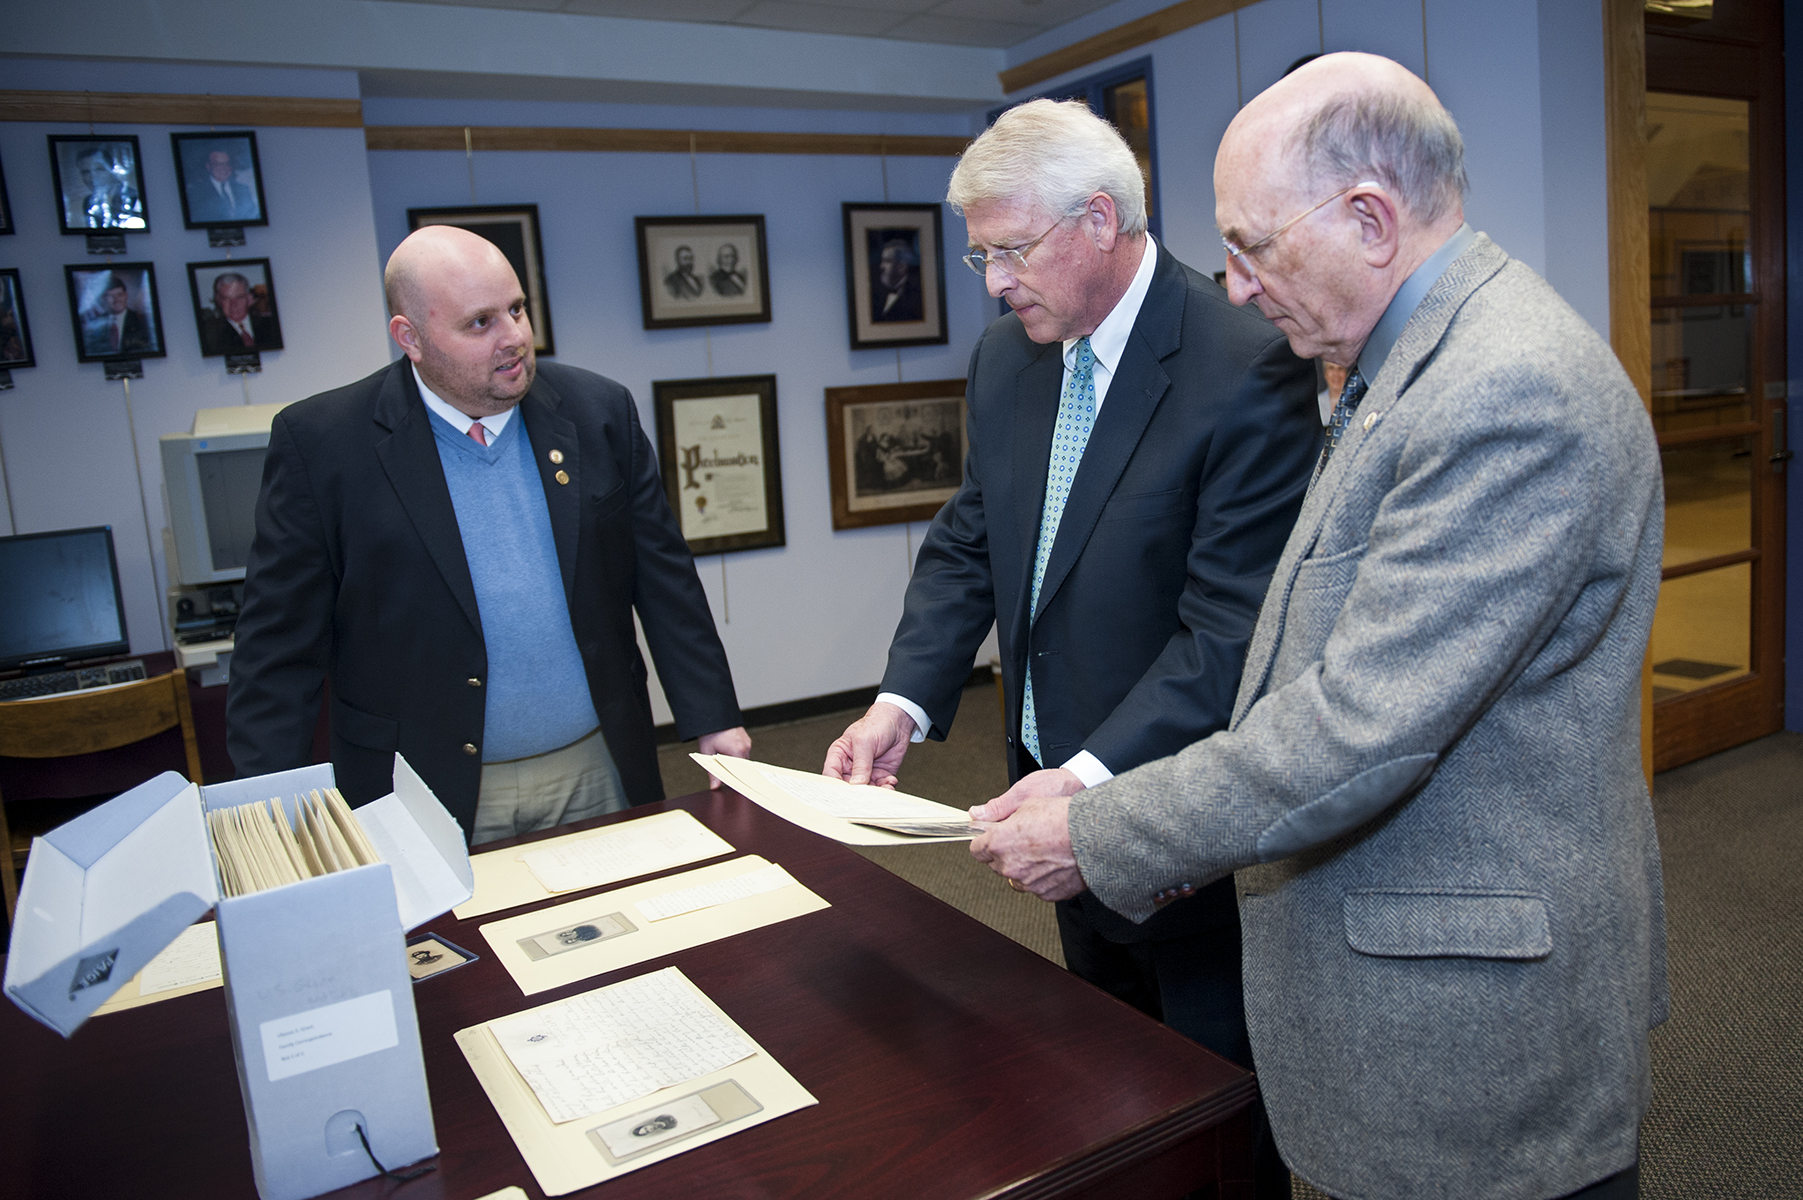 U.S. Sen. Roger Wicker, center, toured MSU's Ulysses S. Grant Presidential Library during a Wednesday campus visit. Ryan Semmes, left, Mitchell Memorial Library assistant professor, and John Marszalek, executive director and managing editor for the Grant Library and the Ulysses S. Grant Association, served as his guides through the collection.